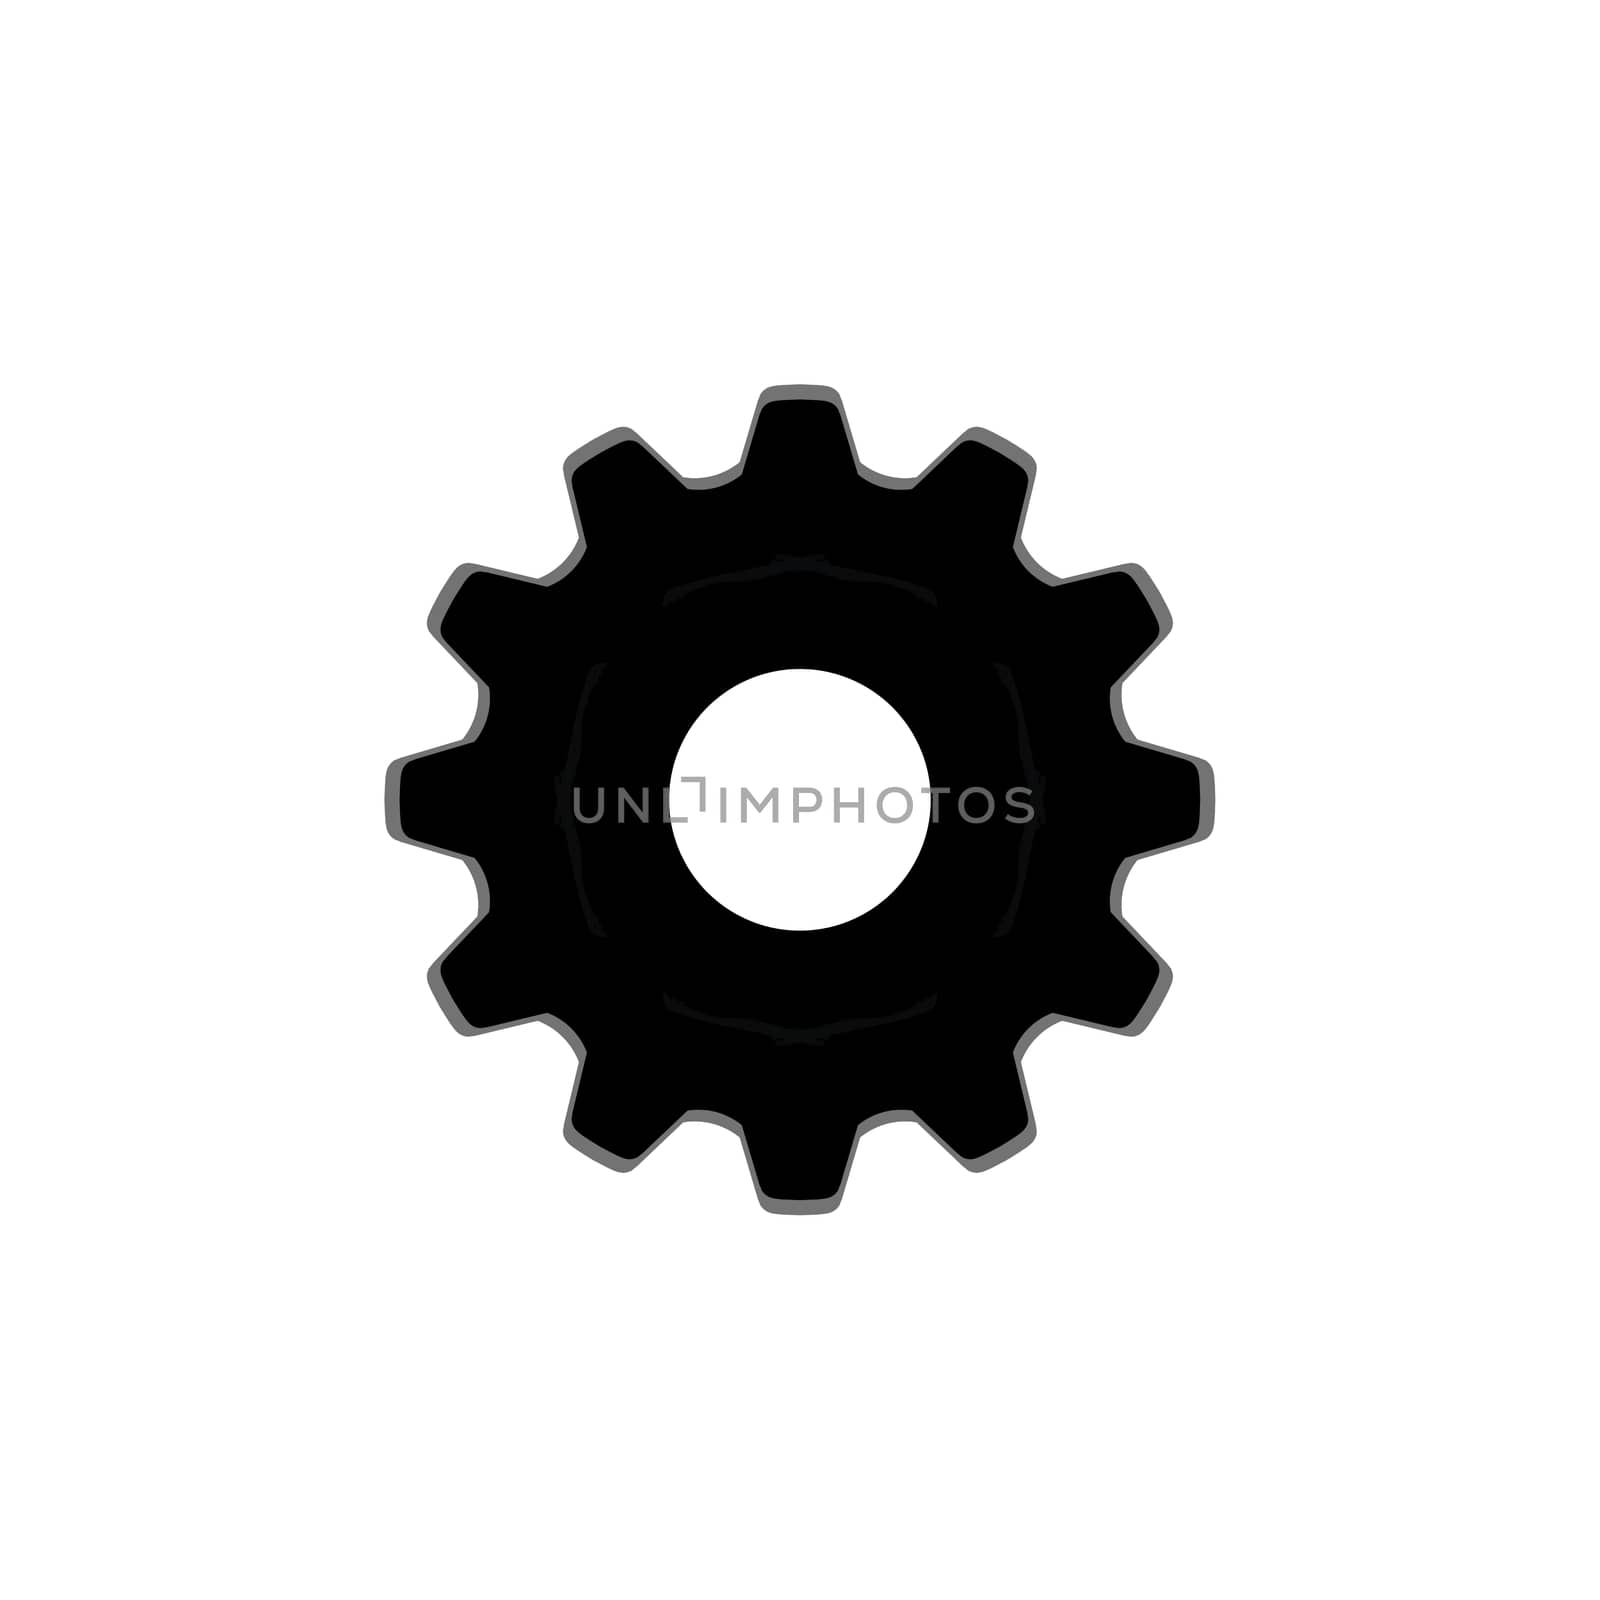 Gear or cog icon on white background.Technological driving, symbol, by praditlohhana